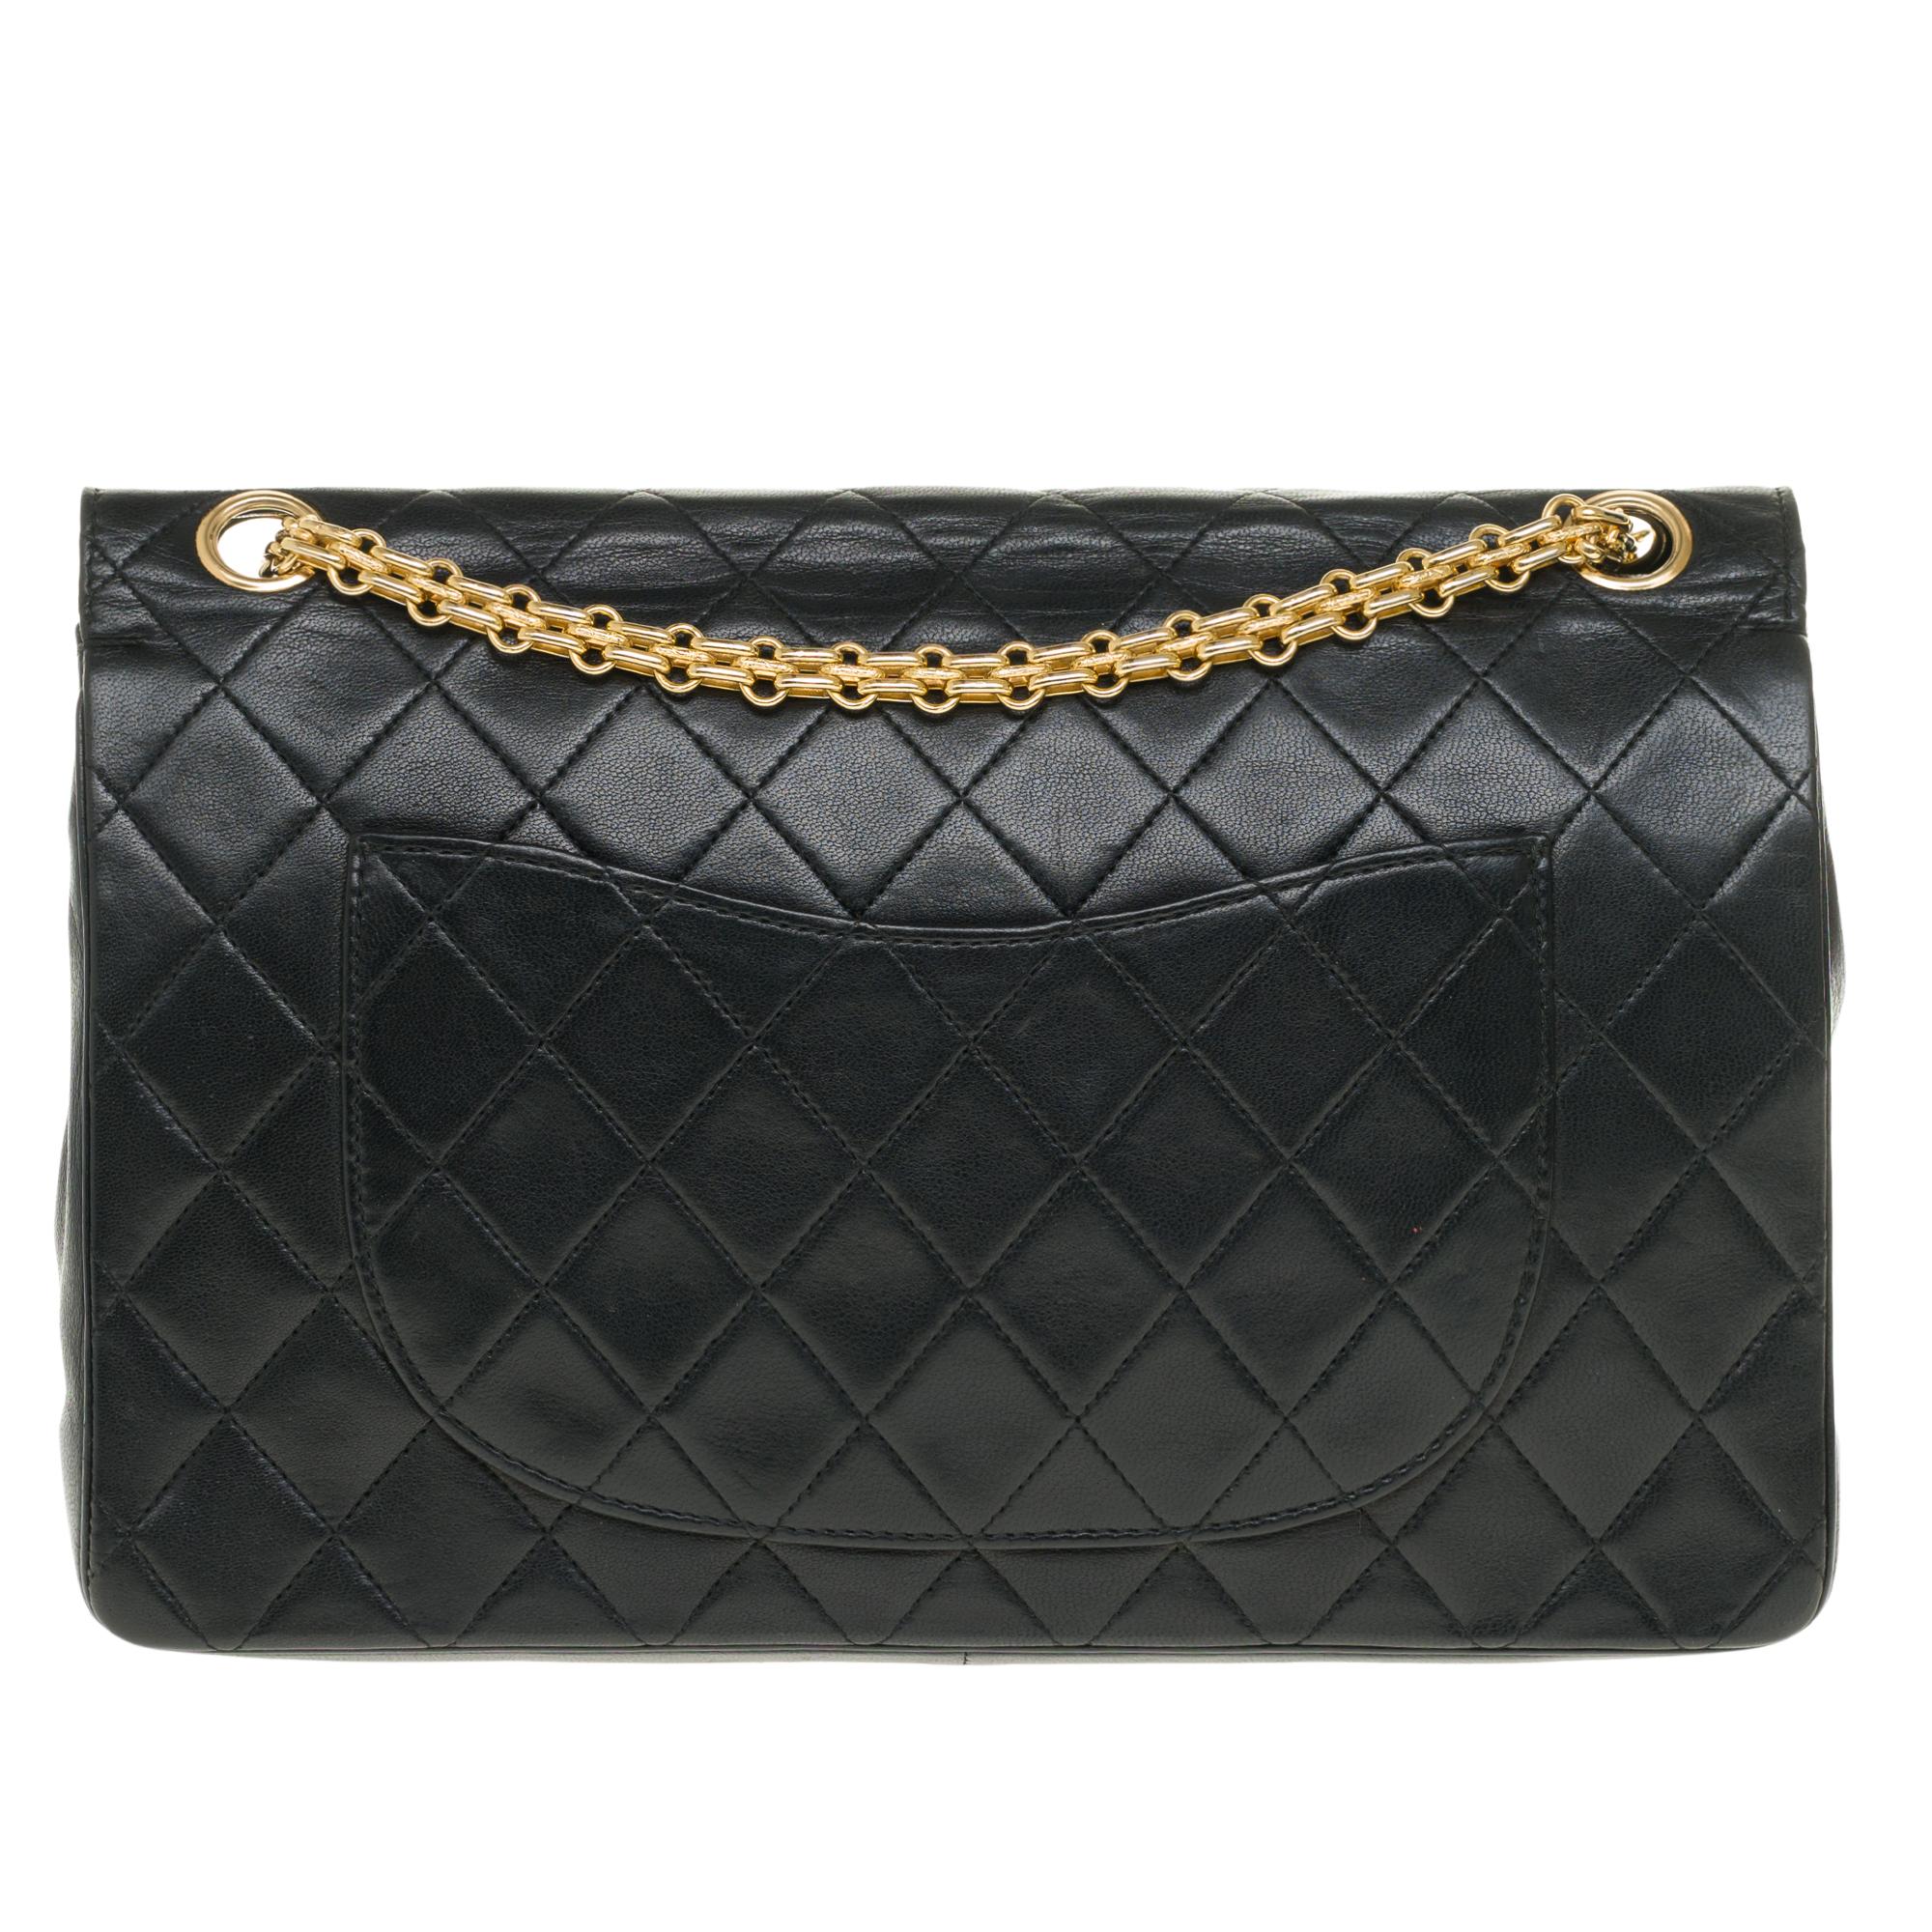 Beautiful Chanel Timeless Handbag 27cm with double flap in black quilted lambskin leather, gold metal trim, a Mademoiselle chain handle in gold metal allowing a hand or shoulder support.

Closure with gold metal flap.
A patch pocket on the back of